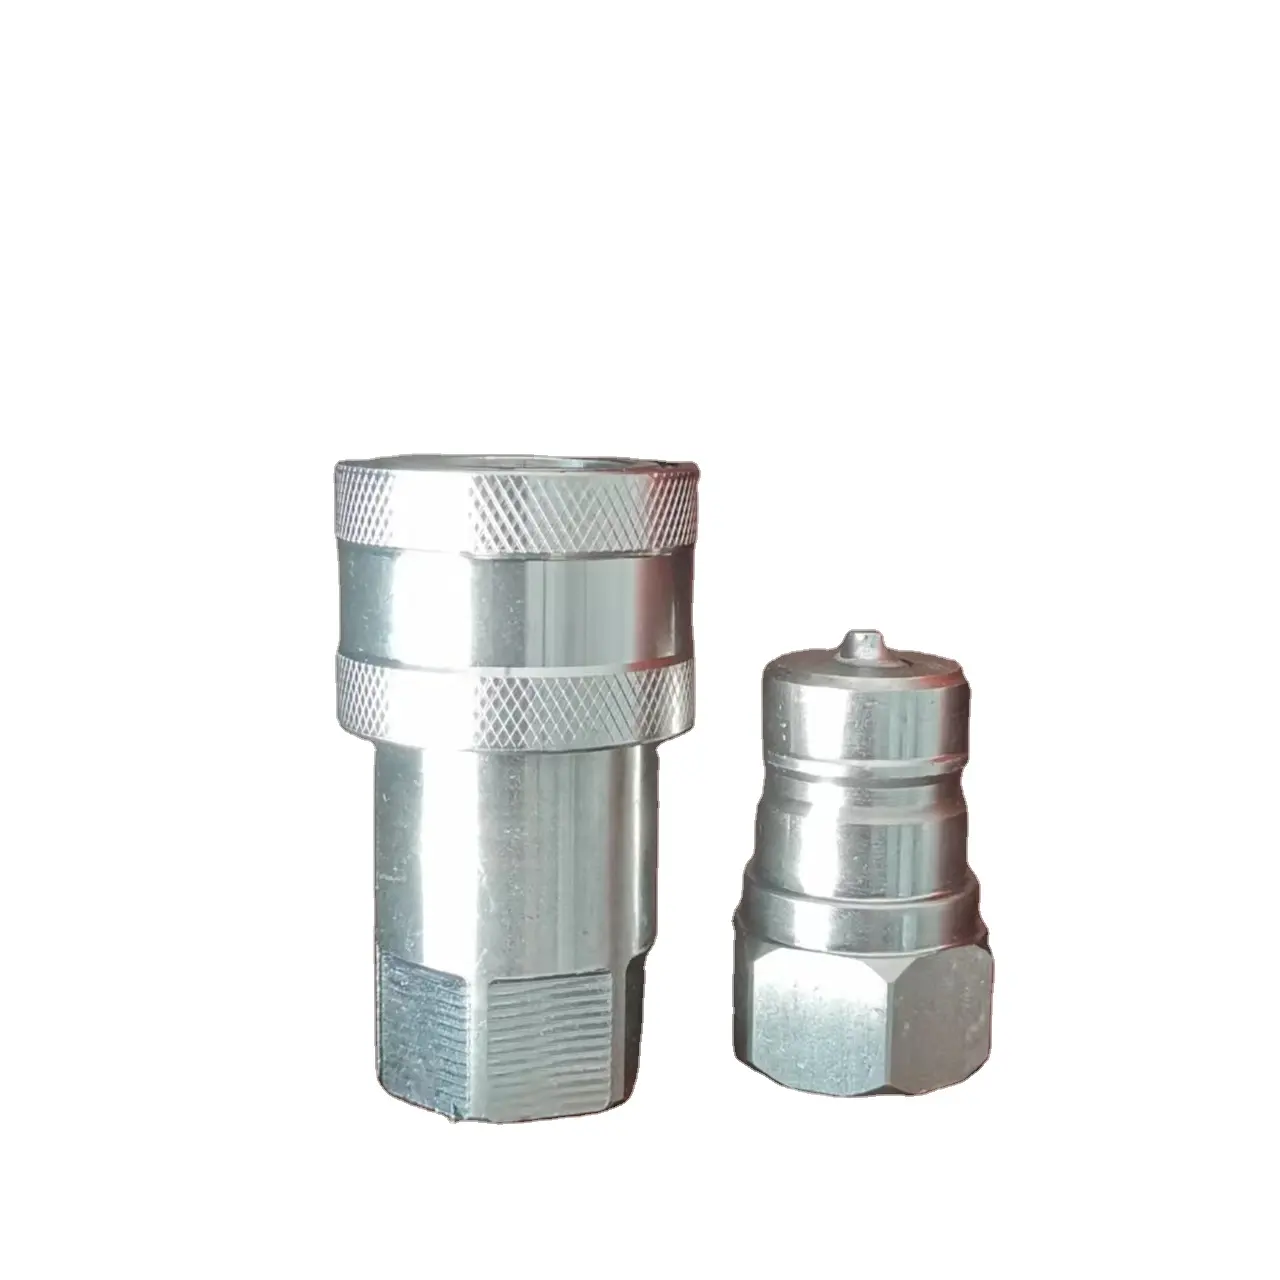 KZE series 3/4" Push-In Hydraulic Quick release action coupling Connector joint hose fitting agricultural machinery accessor